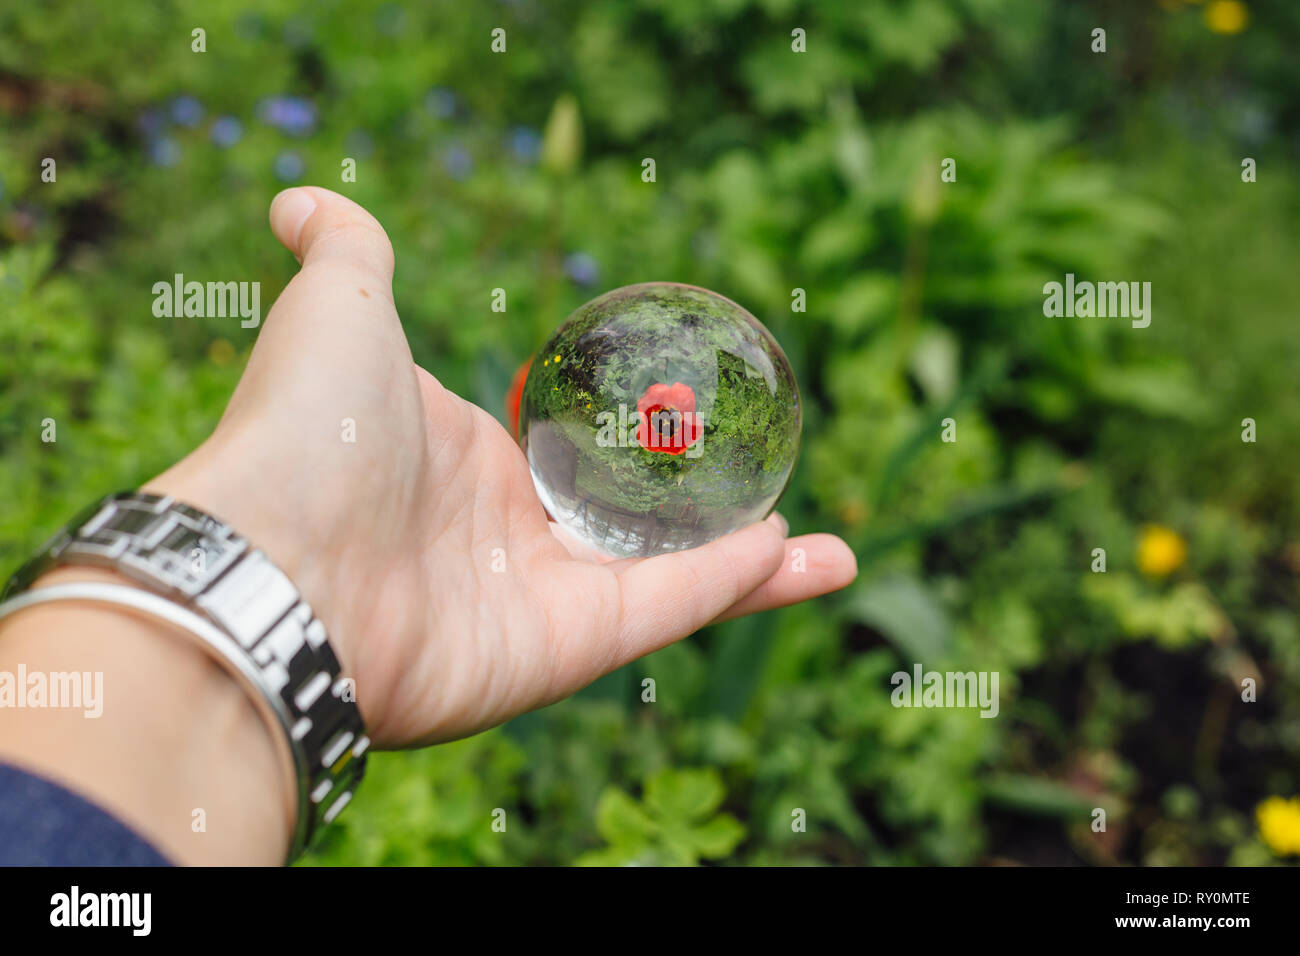 Lens ball in hand with reflection of red tulip Stock Photo